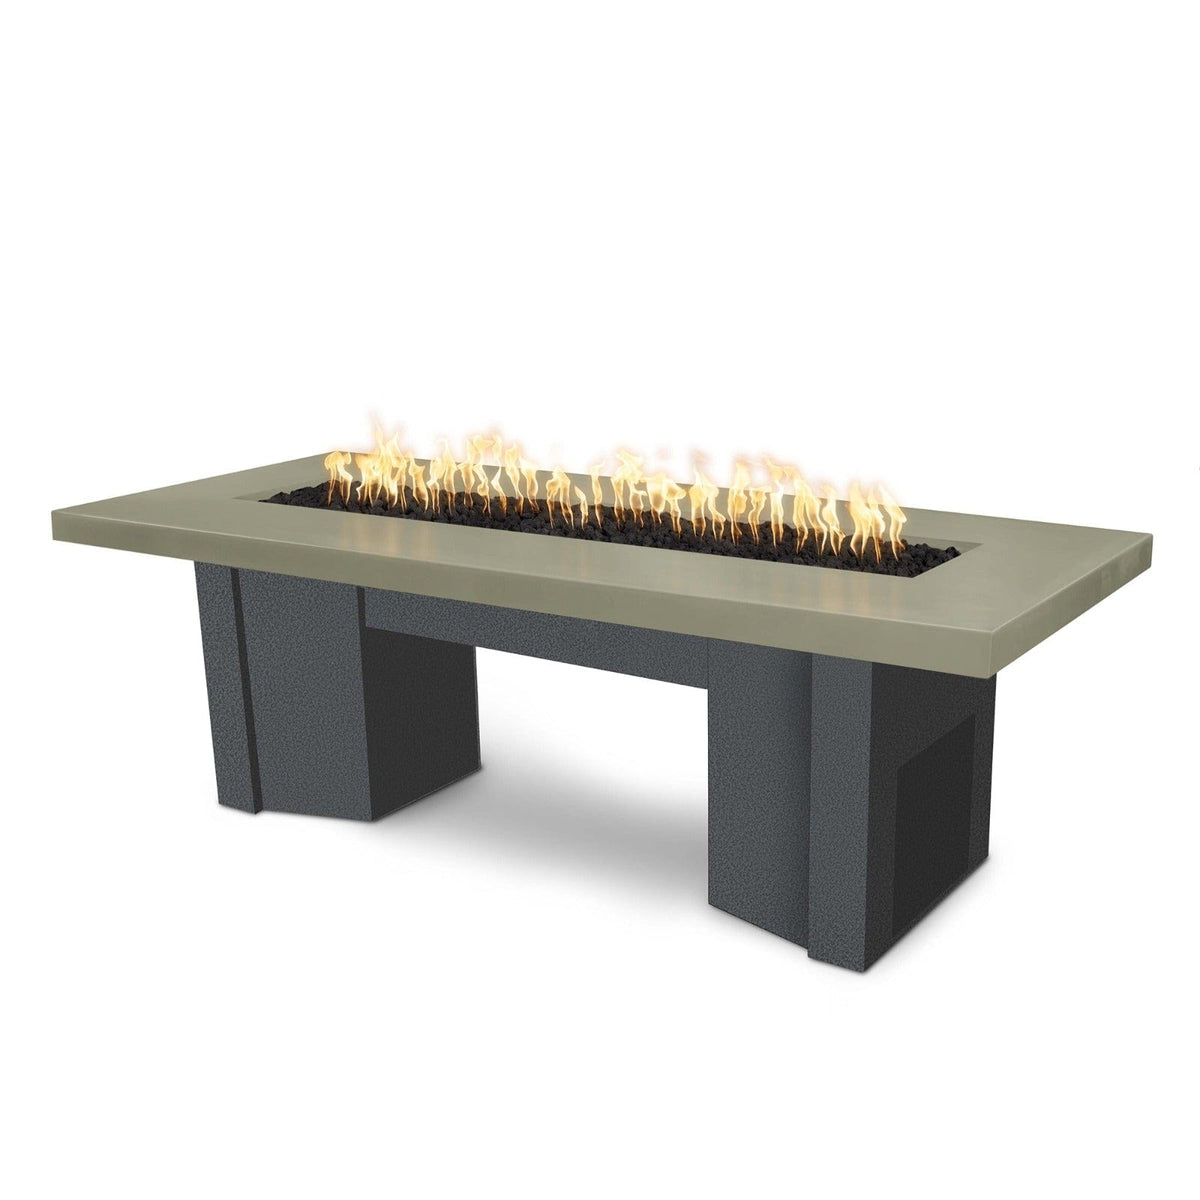 The Outdoor Plus Fire Features Ash (-ASH) / Silver Vein Powder Coated Steel (-SLV) The Outdoor Plus 78&quot; Alameda Fire Table Smooth Concrete in Natural Gas - Match Lit with Flame Sense System / OPT-ALMGFRC78FSML-NG